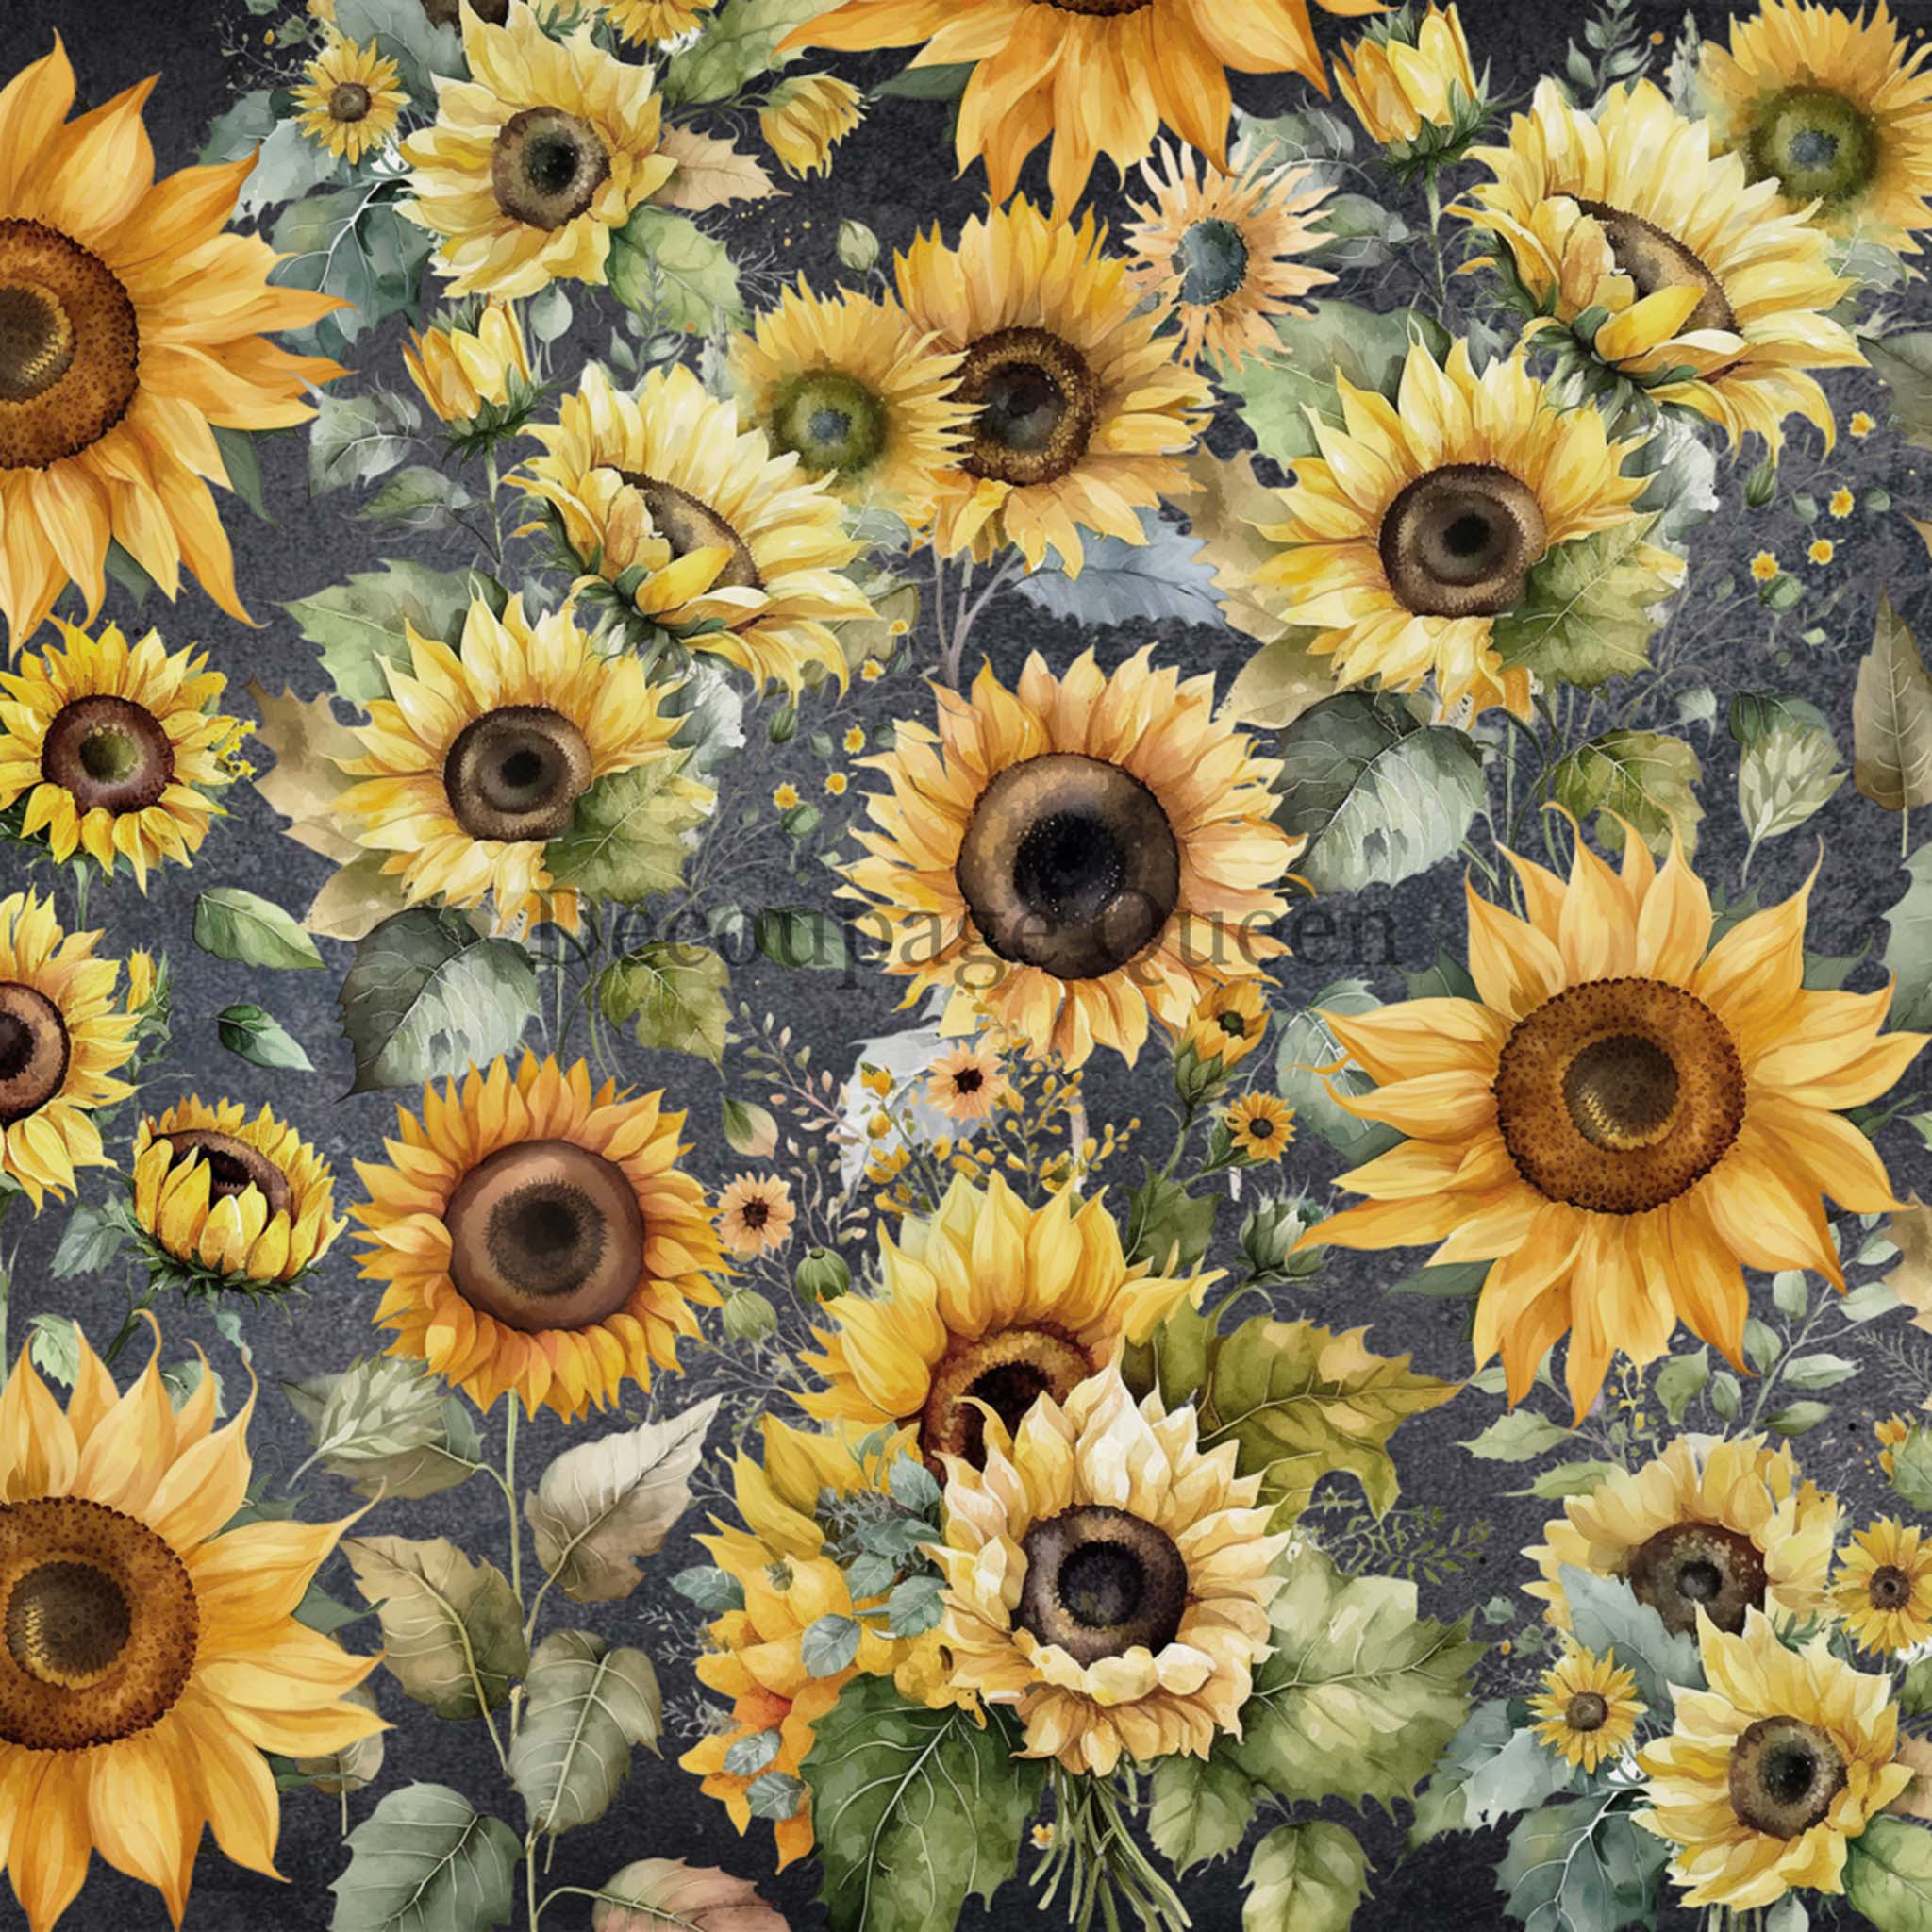 A1 rice paper design featuring cheerful sunflowers bursting across a grey background.